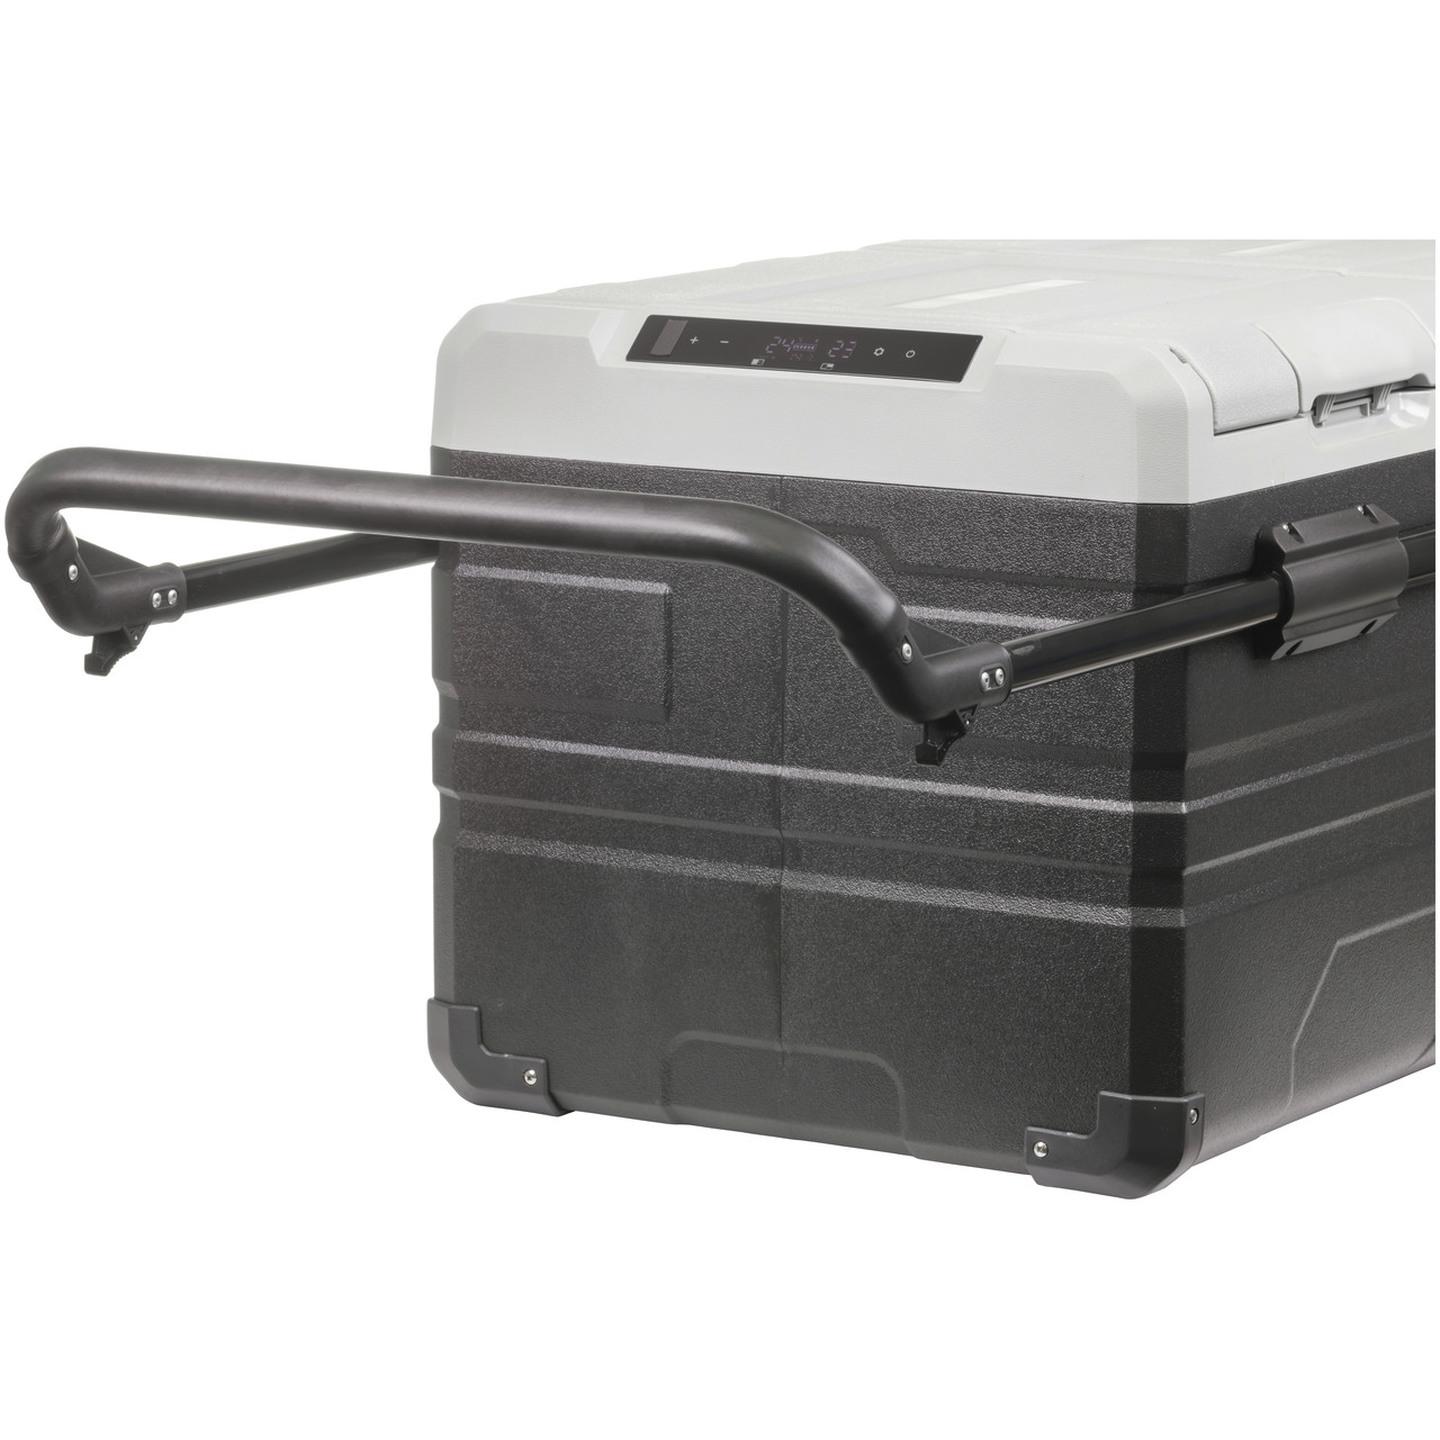 75L Rovin Dual Zone Portable Fridge or Freezer with Solar Charger Board plus HandleWheels and Battery Compartment